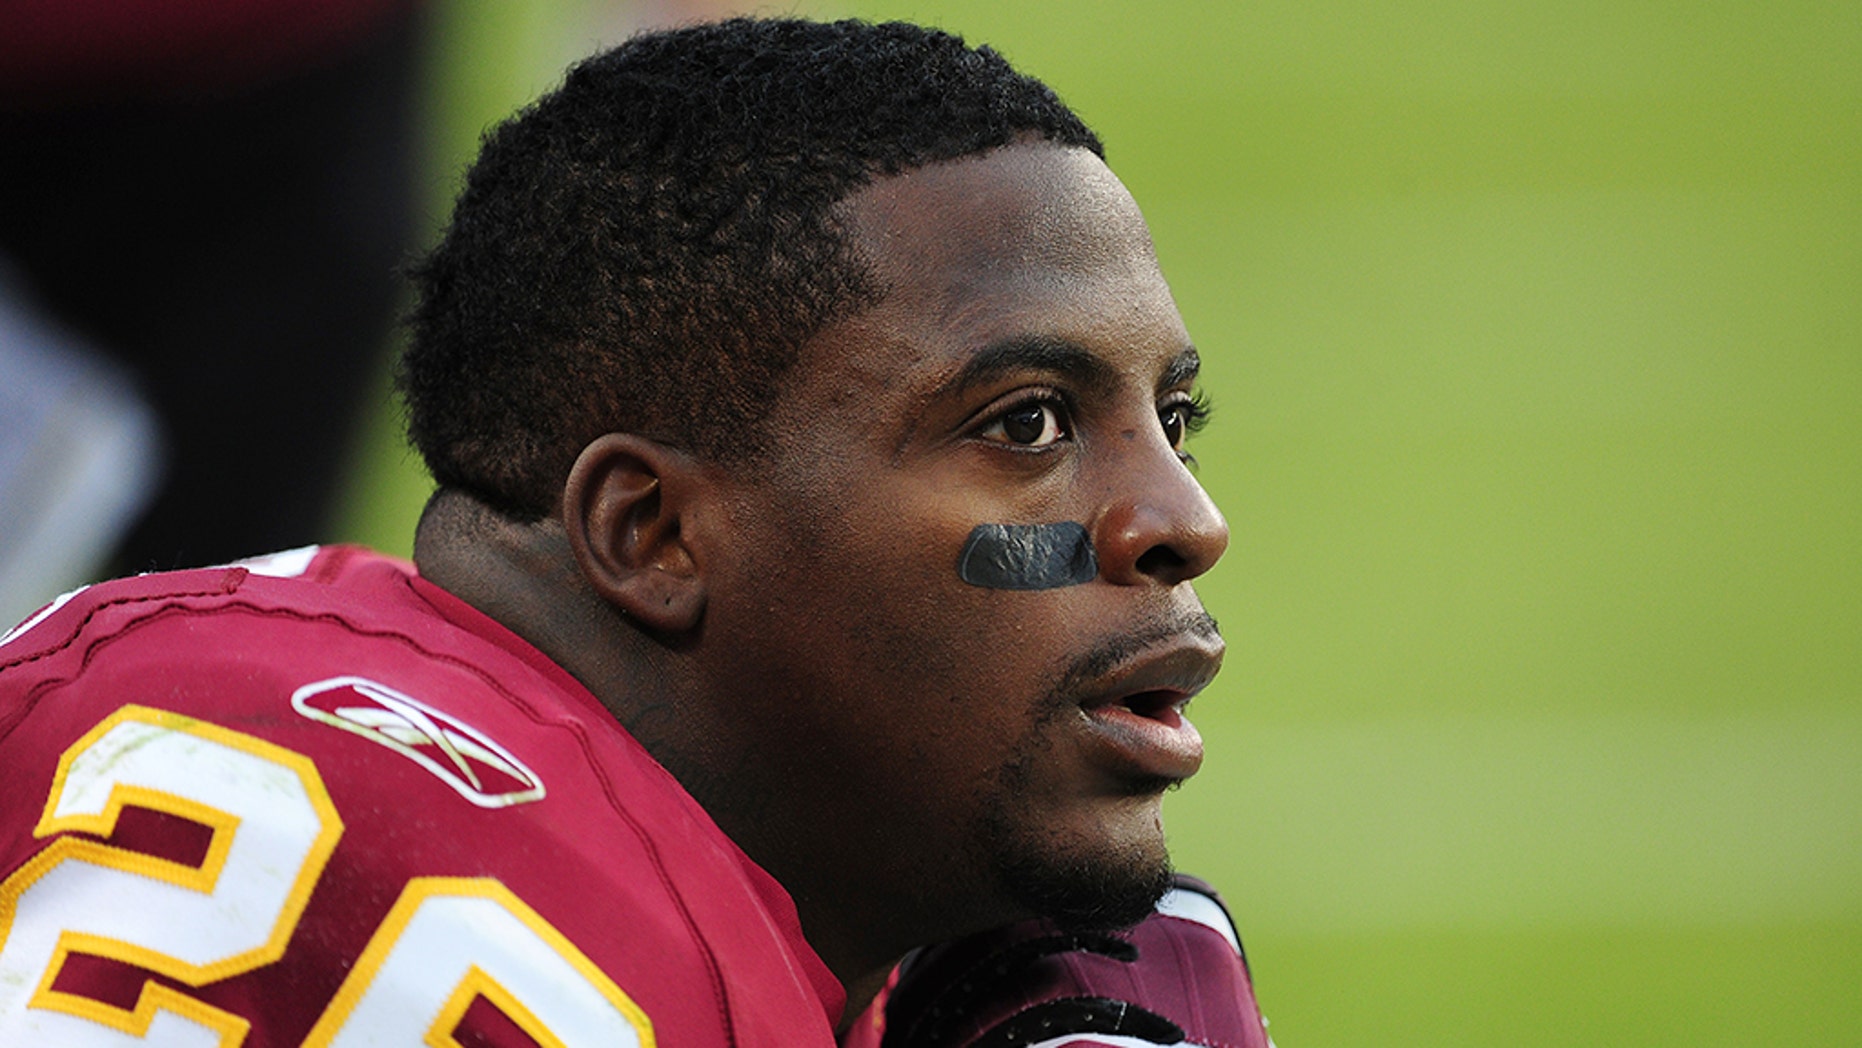 Ex Nfl Great Clinton Portis Took Shot Of Hennessy Before